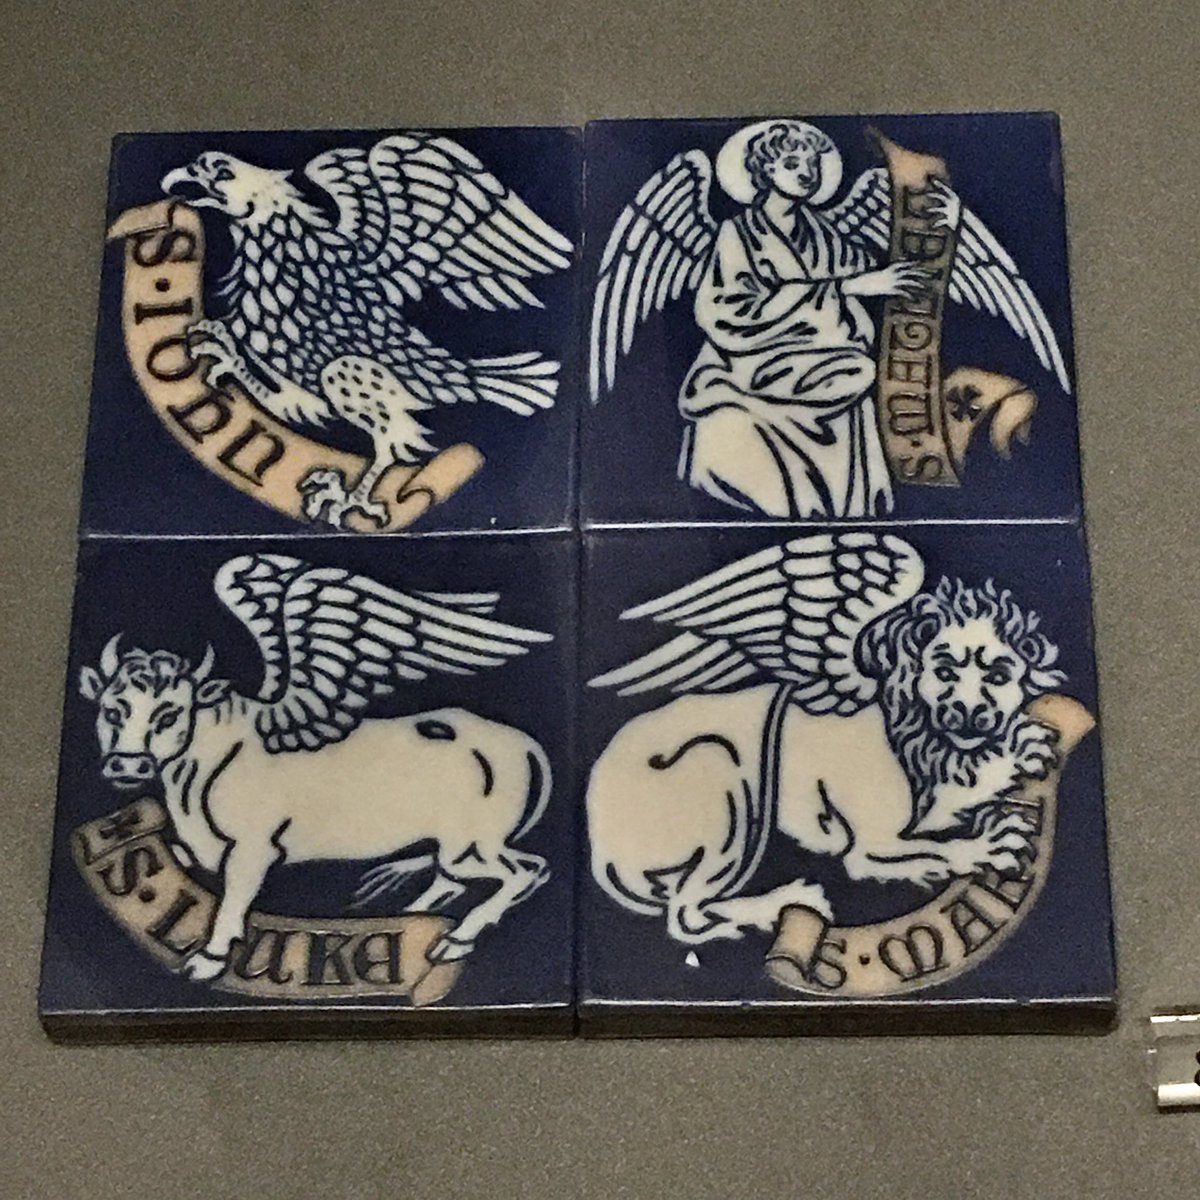 Tiles designed by #AWNPugin & made by #Minton - 1845

Now @V_and_A #London

#TilesOnTuesday